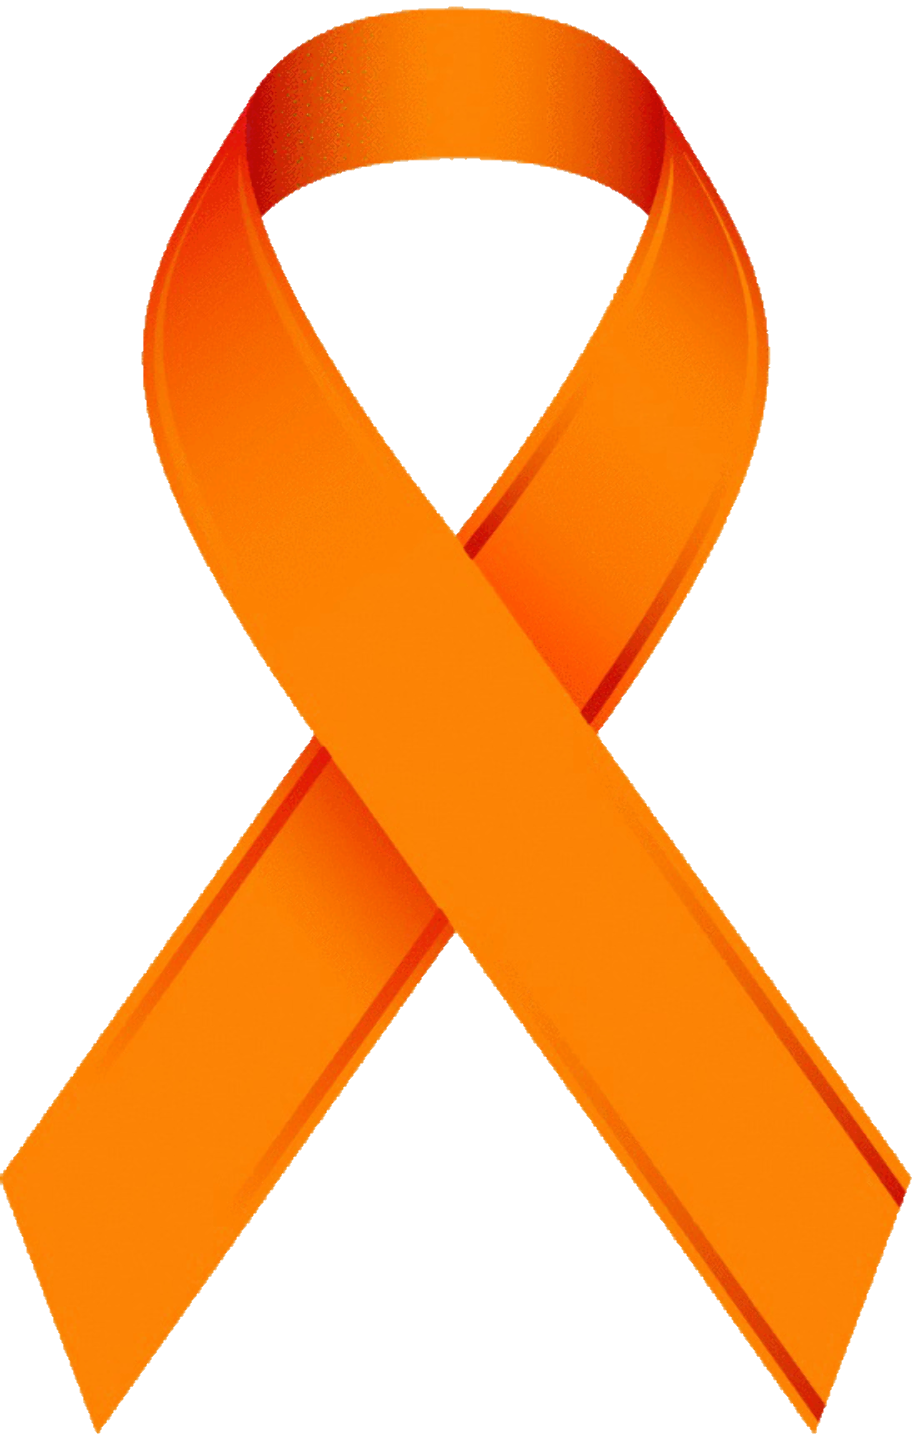 Printable Thank You Templates With A Orange Cancer Ribbon